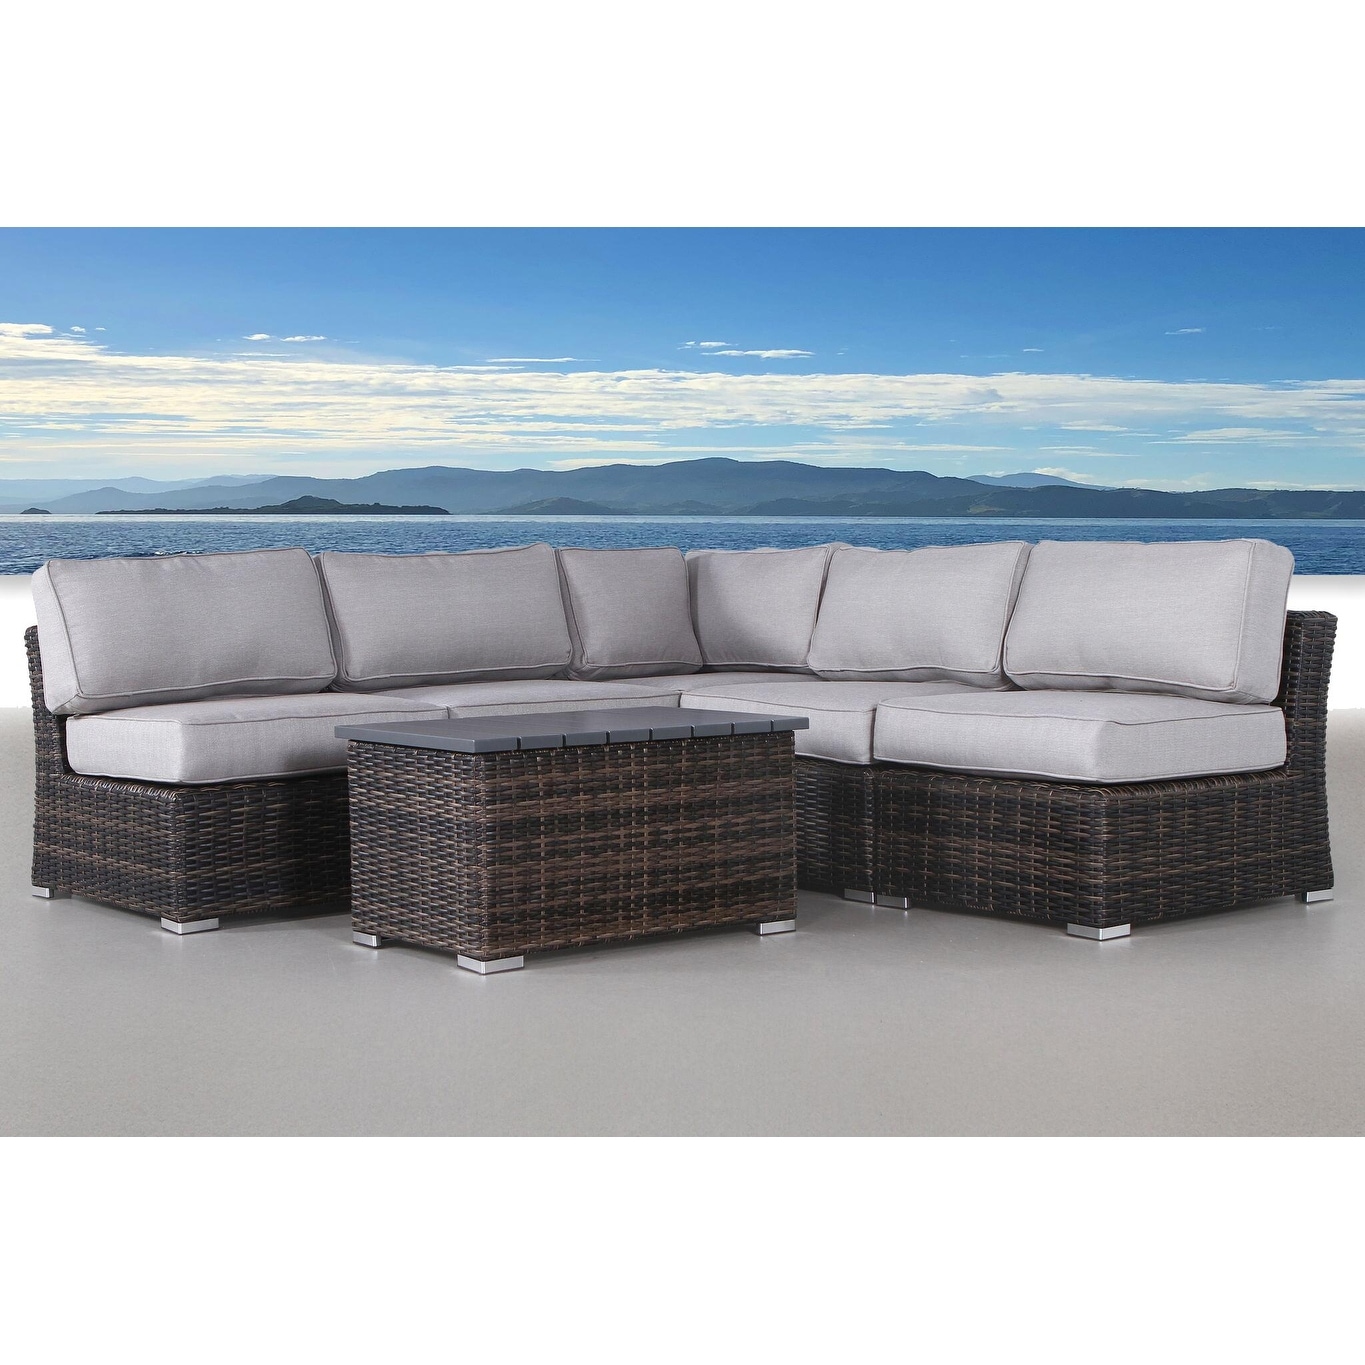 Lsi Wicker Patio Sofa With Cushions 6-piece Sectional Set